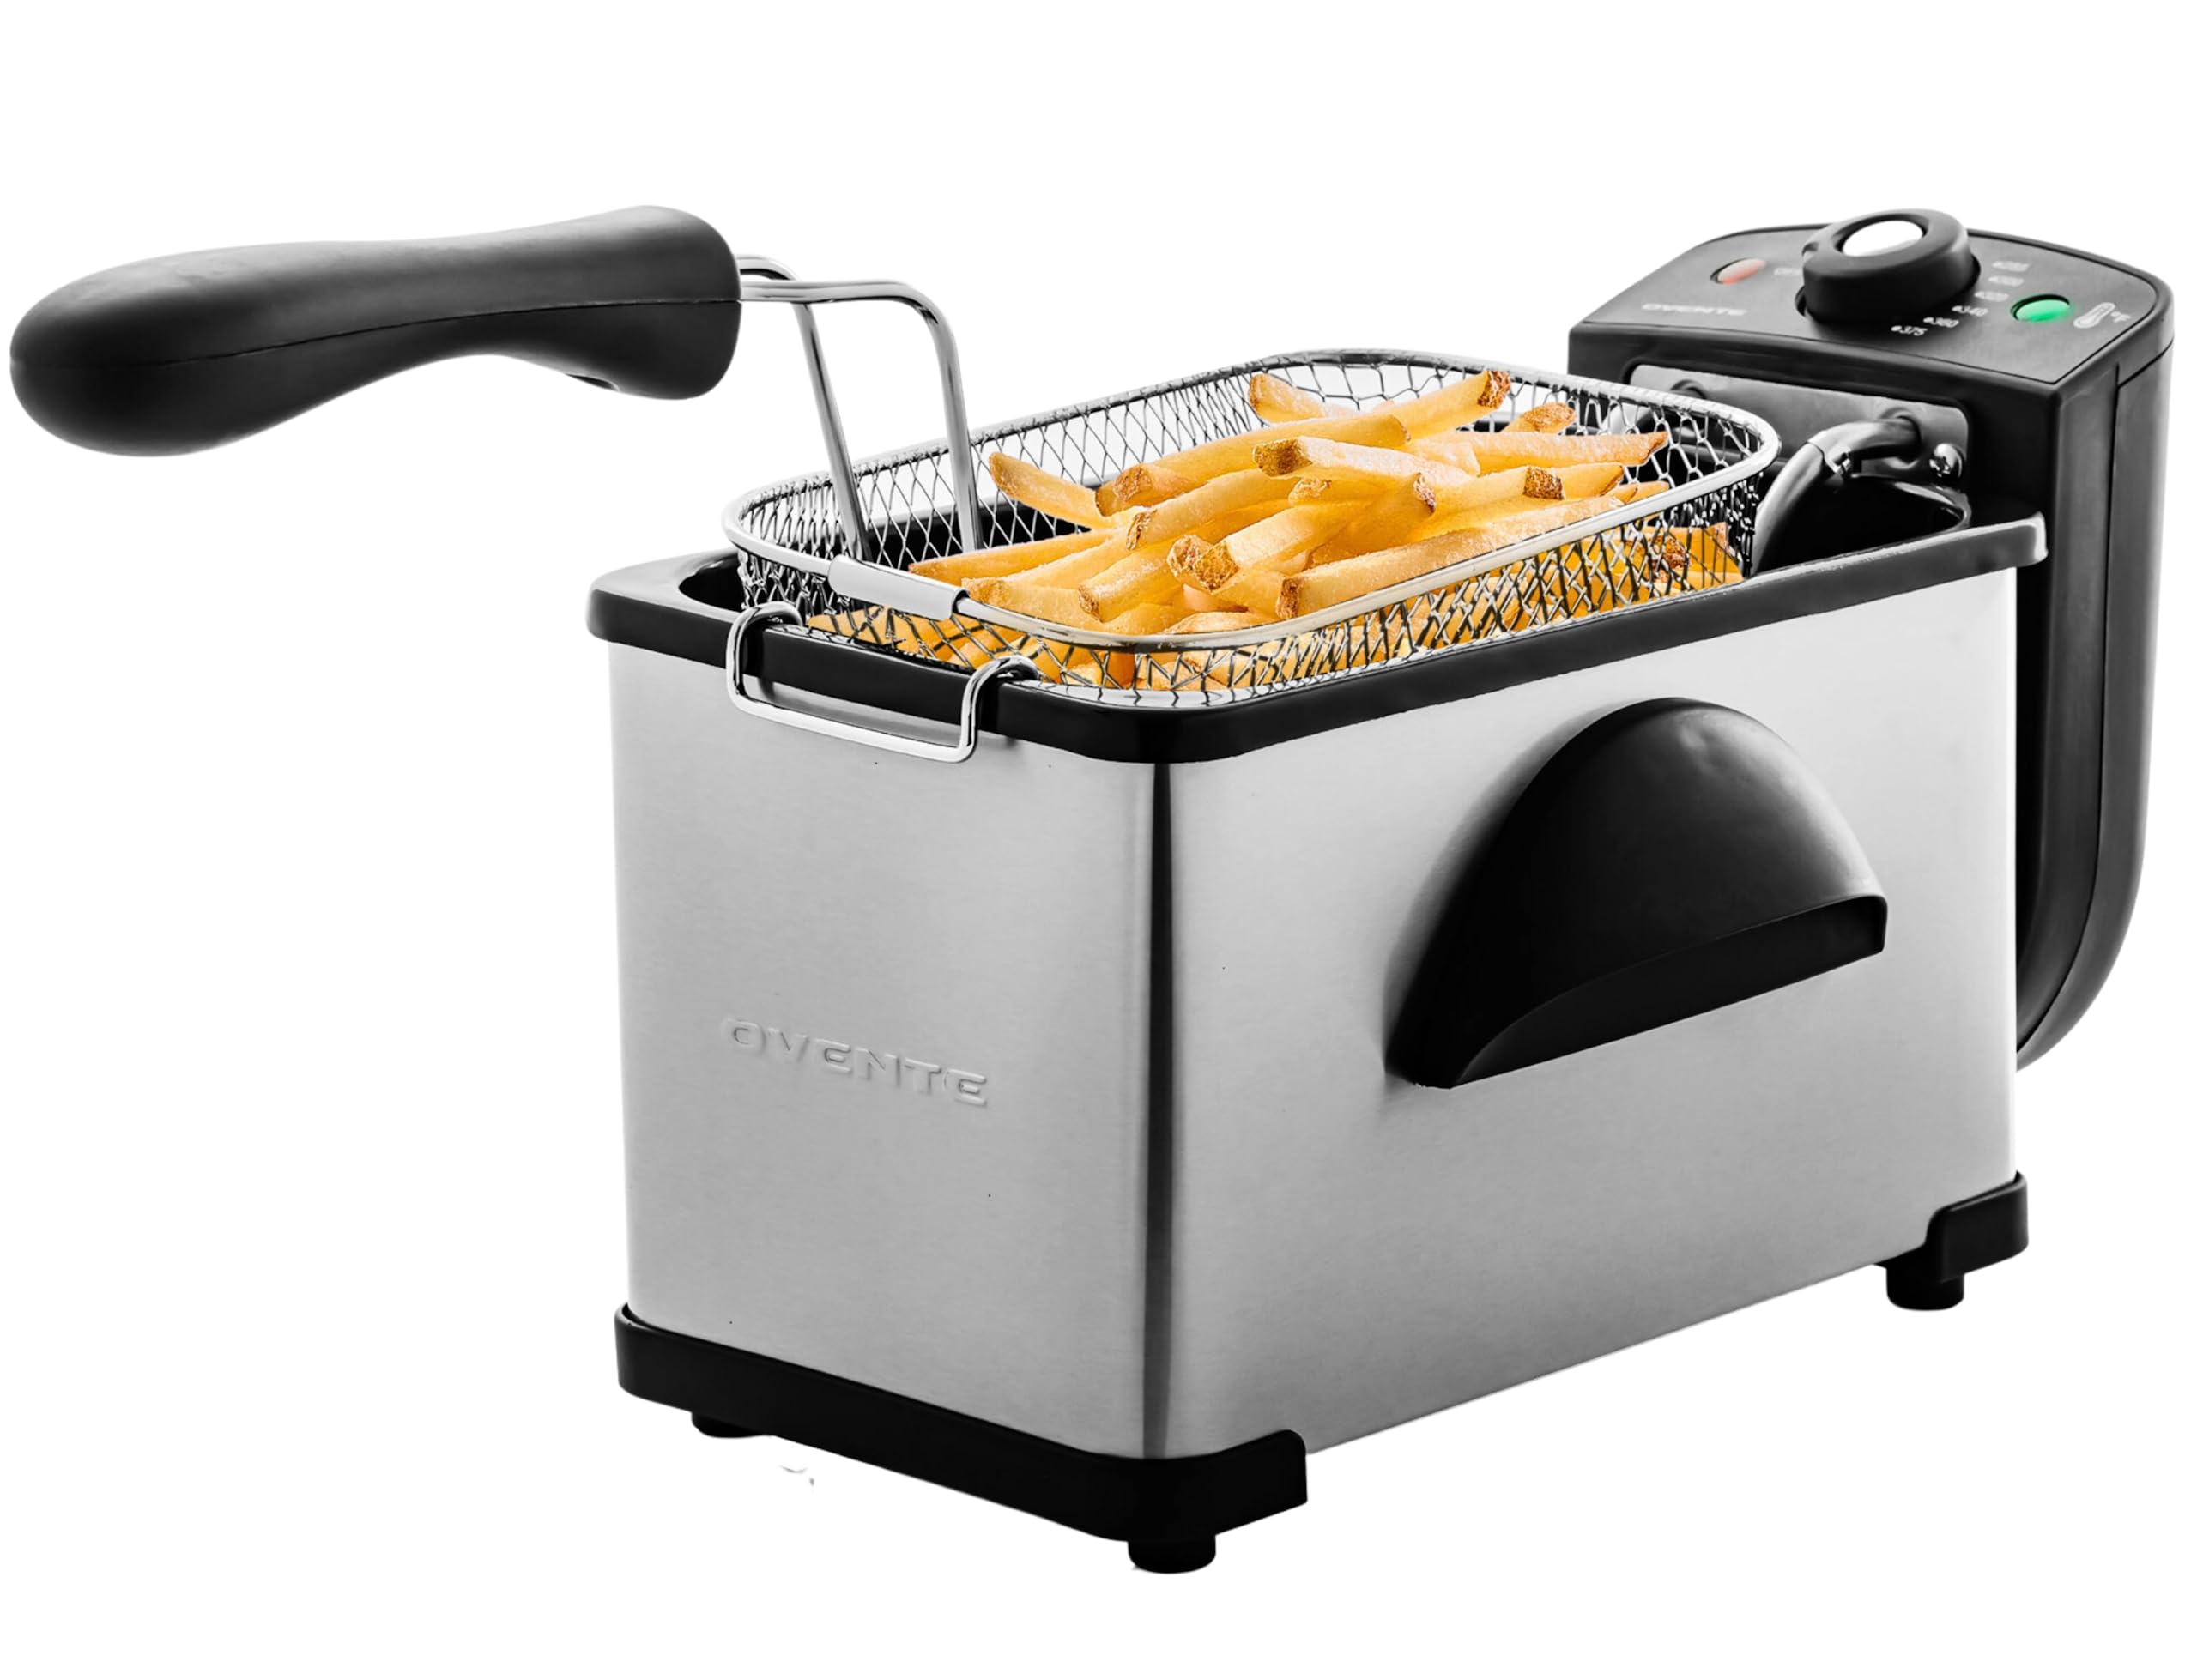 Best Deep Fryer for Delicious Meals at Home in 2023: T-Fal FR8000 is Our Top Pick